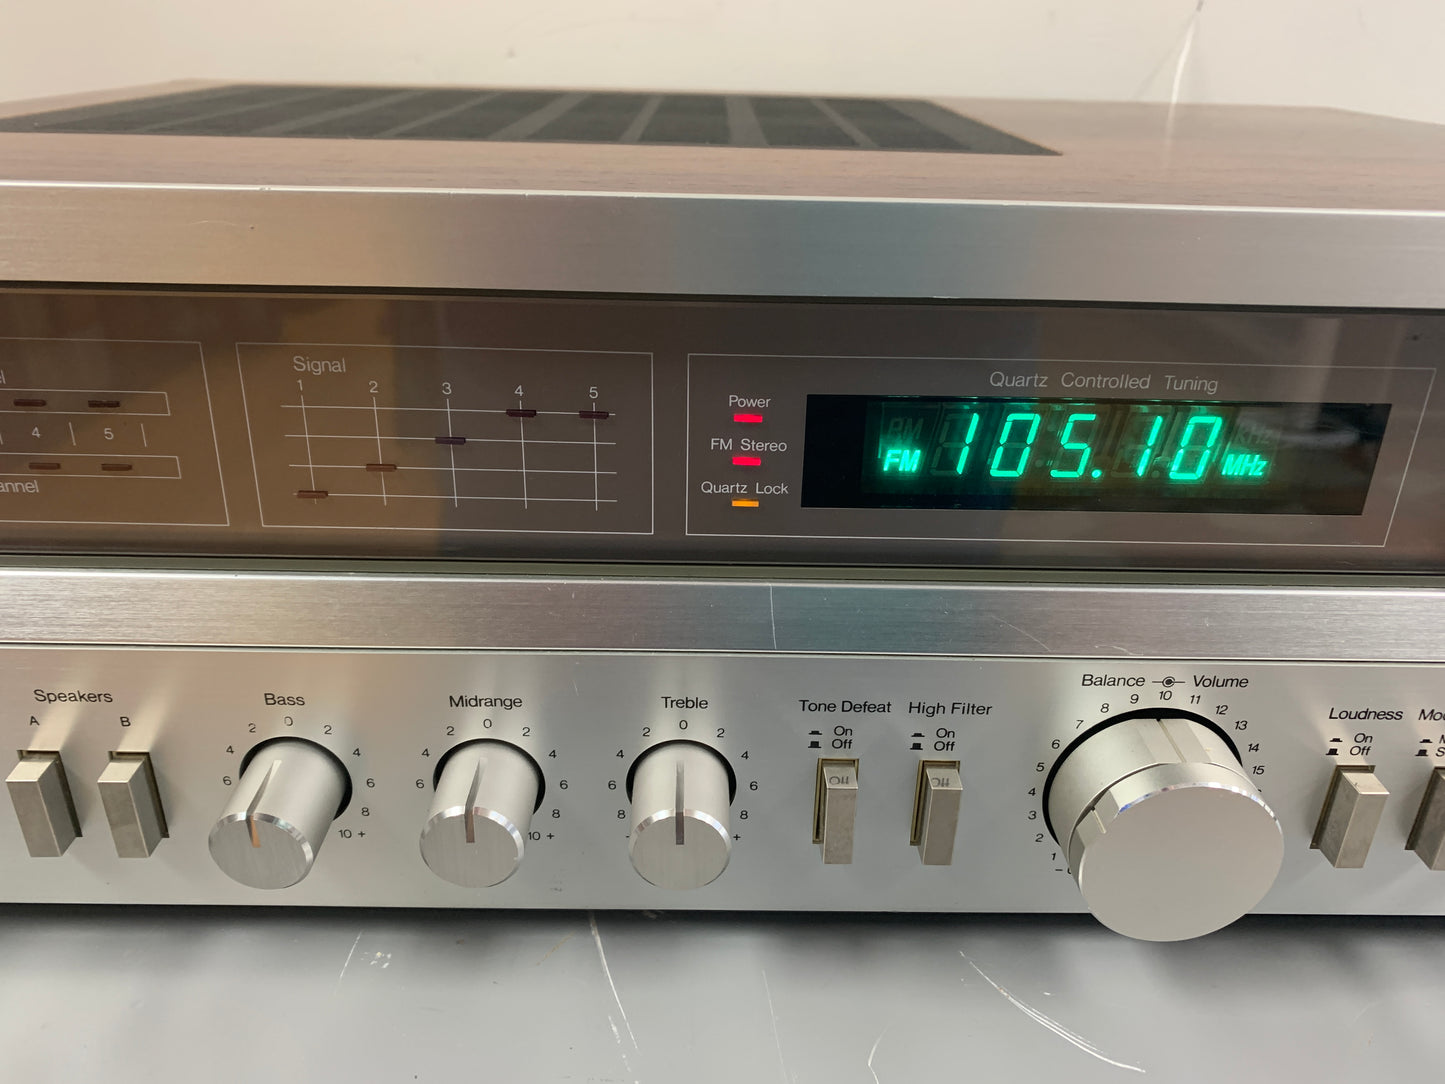 MCS Modular Component System 3249 Stereo Receiver